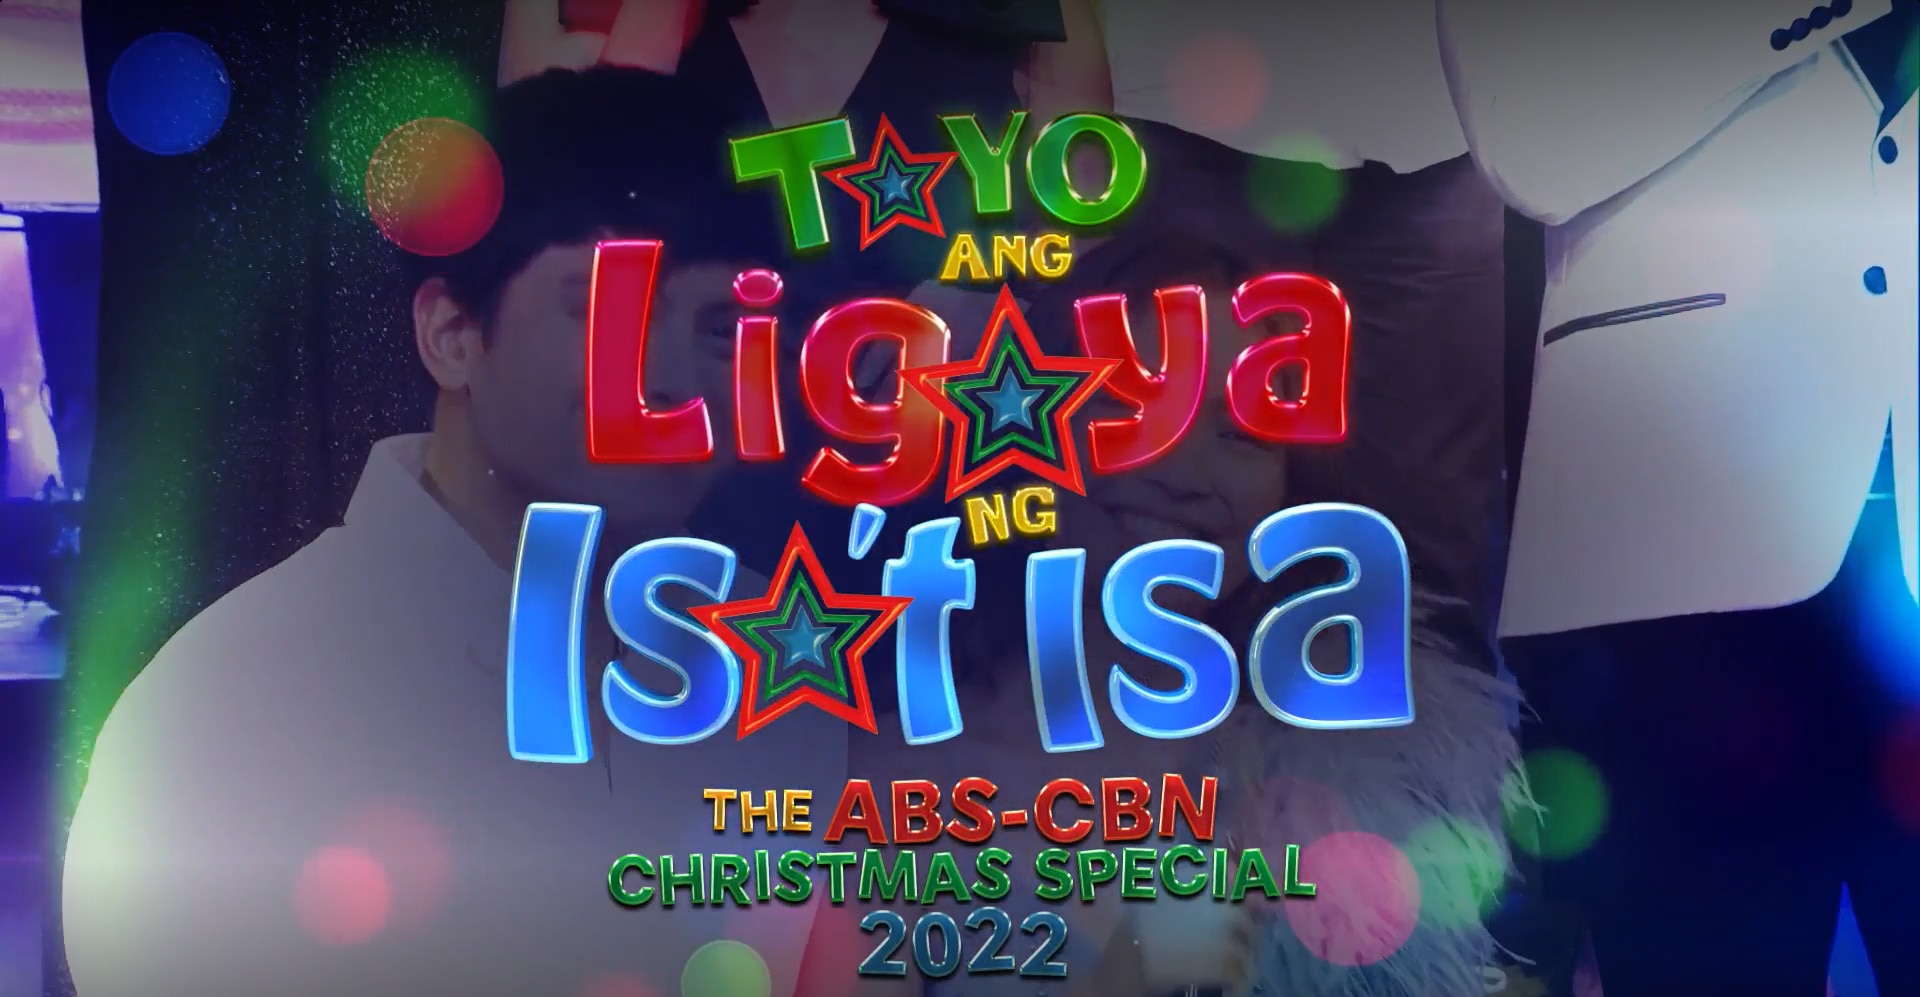 Starstudded ABSCBN Christmas Special to spread joy to Filipinos this